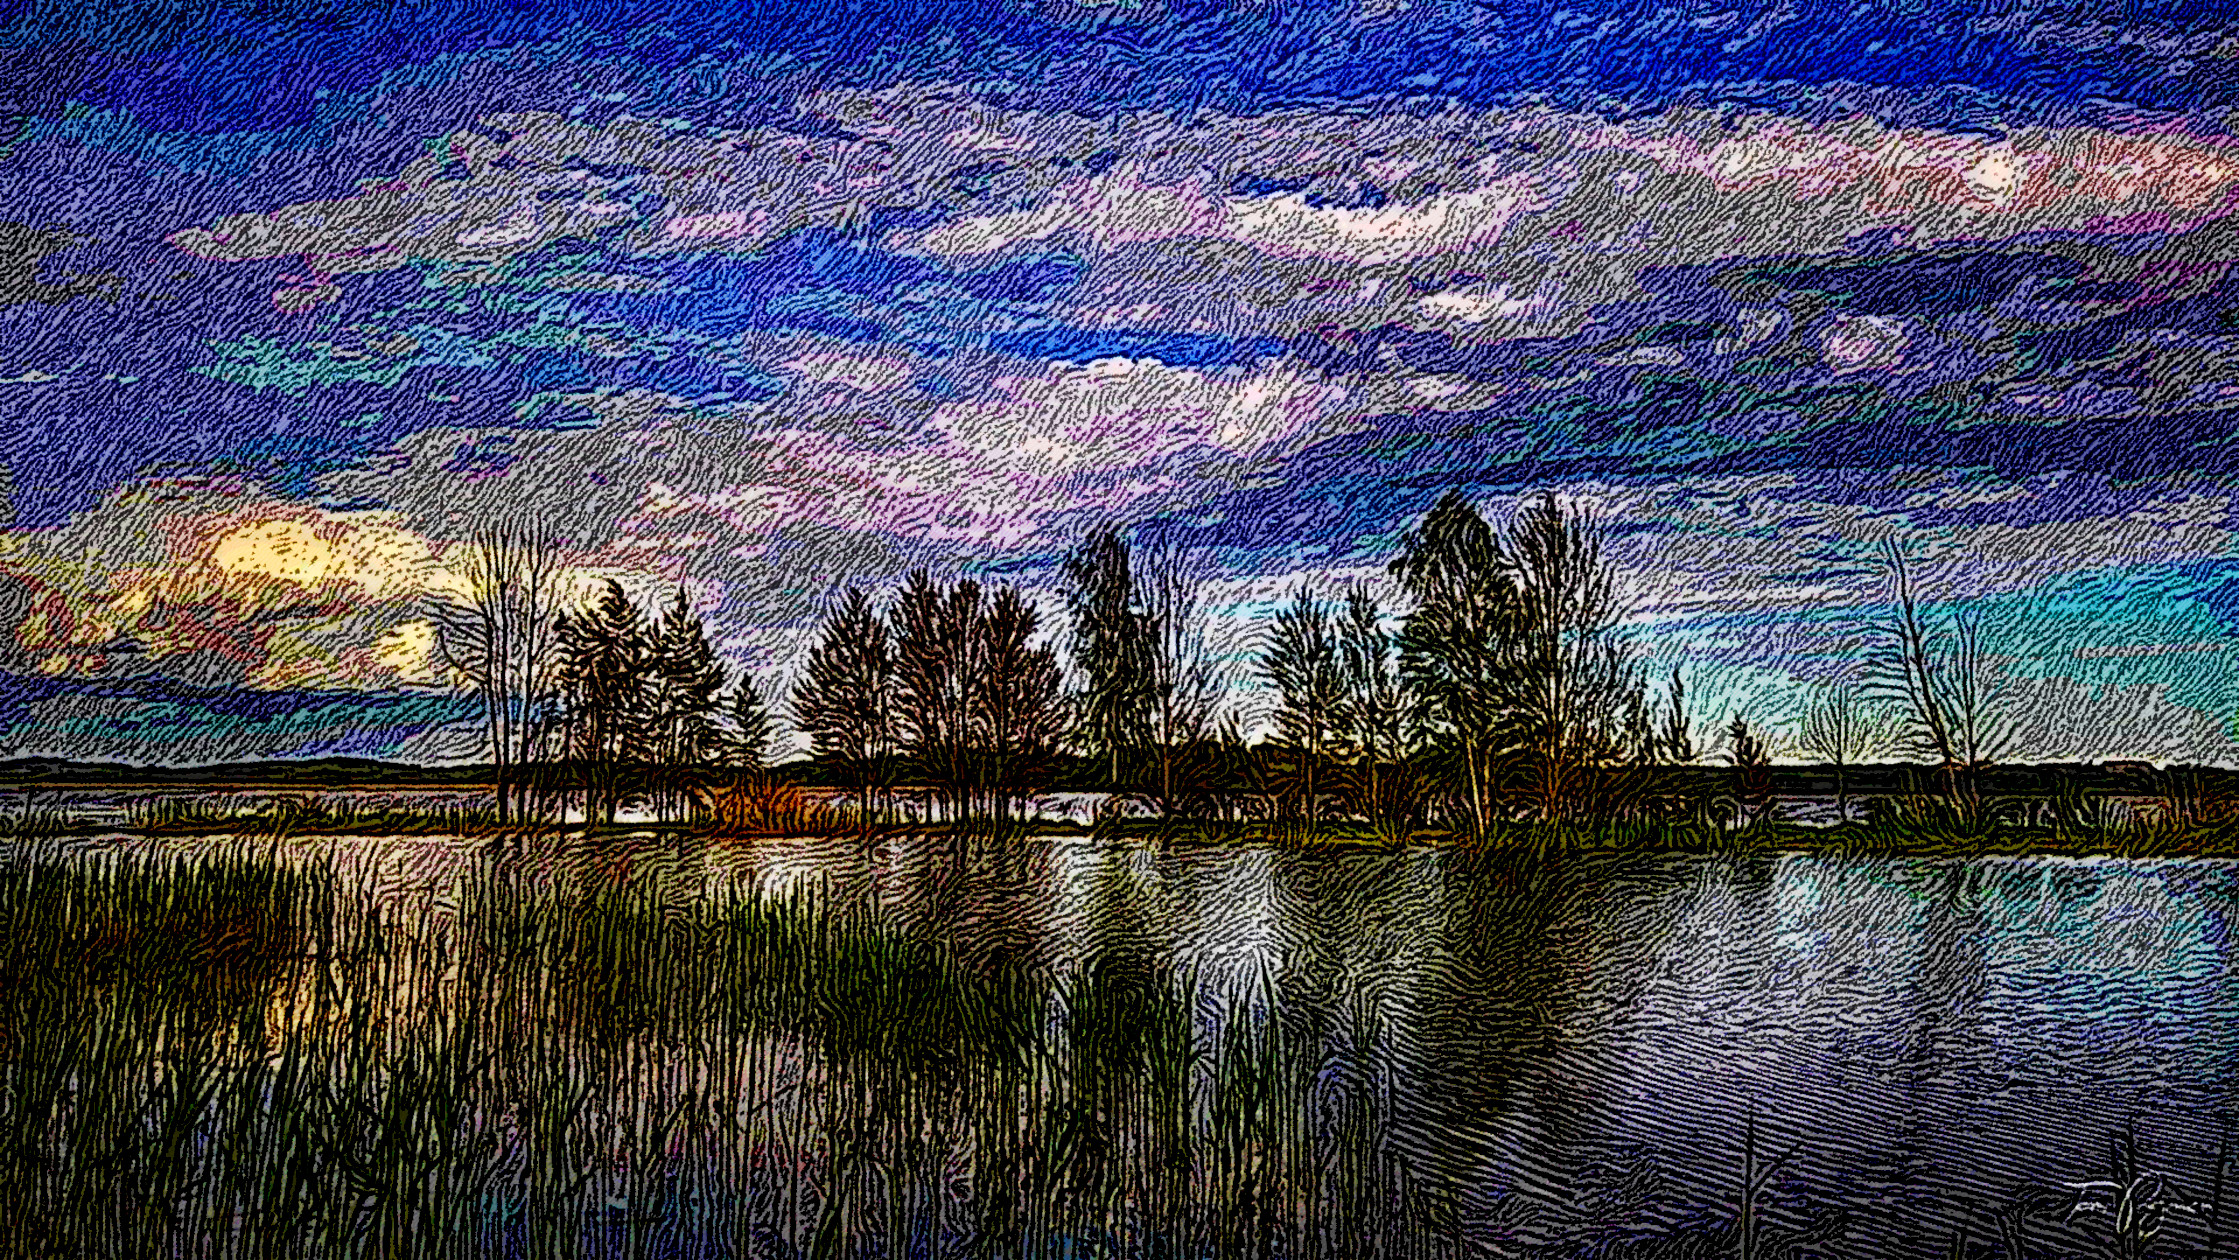 trees_by_the_lagoon_by_pajunen_ddy6duc-DN_DrawEffect_S_Angular_nb.jpg